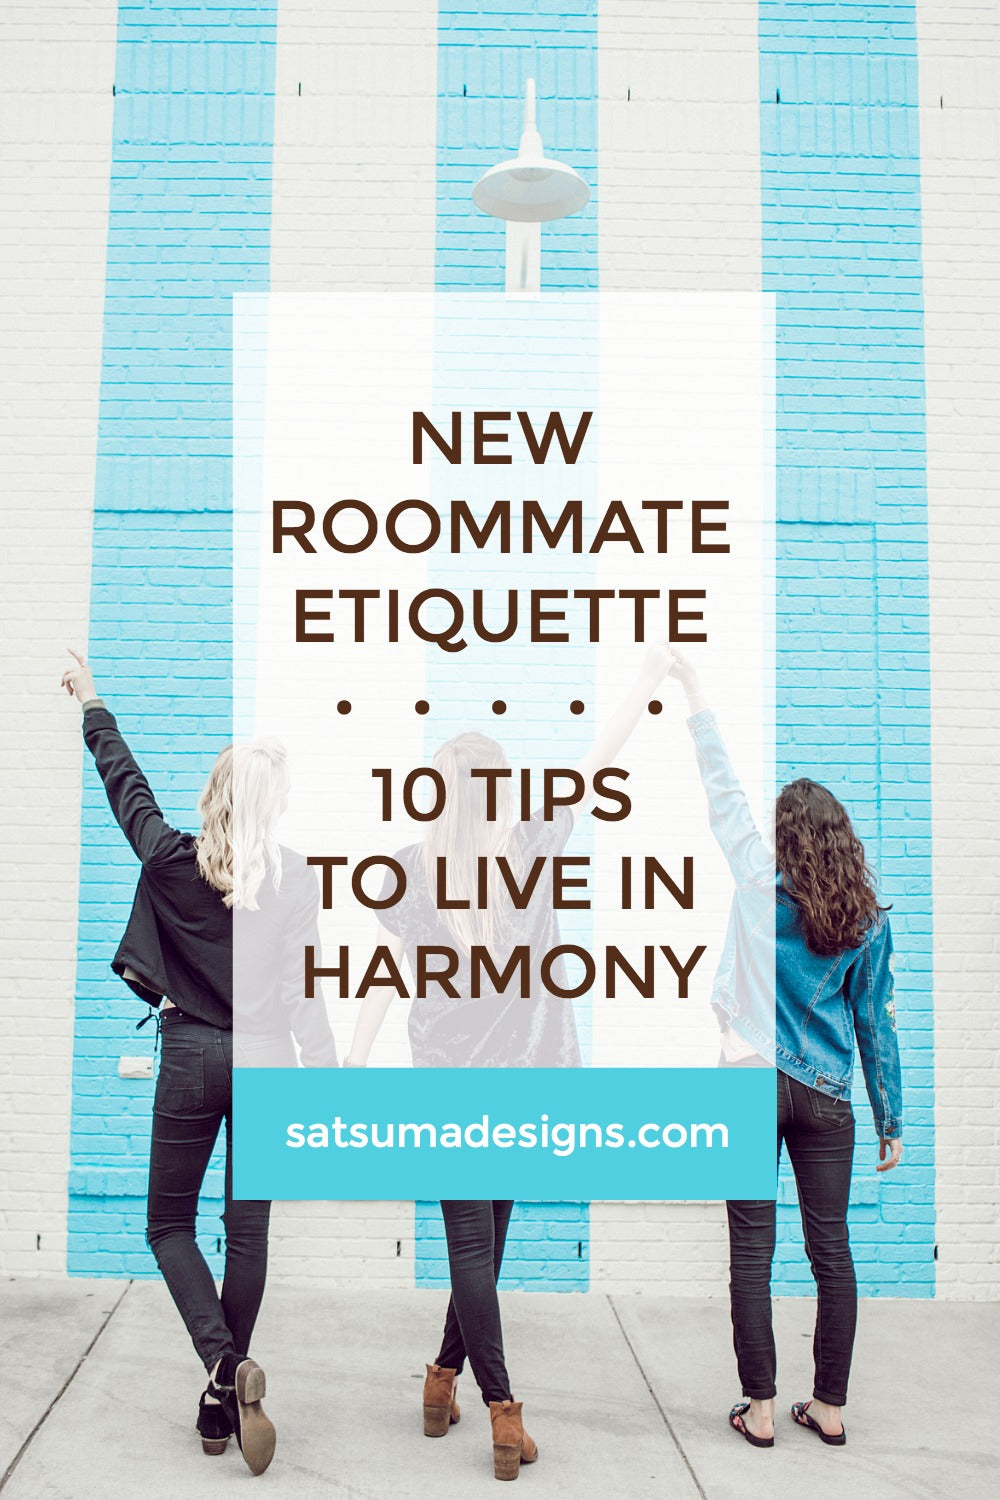 New roommate etiquette | 10 tips to live in harmony and peace | #satsuma #collegedormlife #newroommate #liveinpeace #peacefulliving #meditate